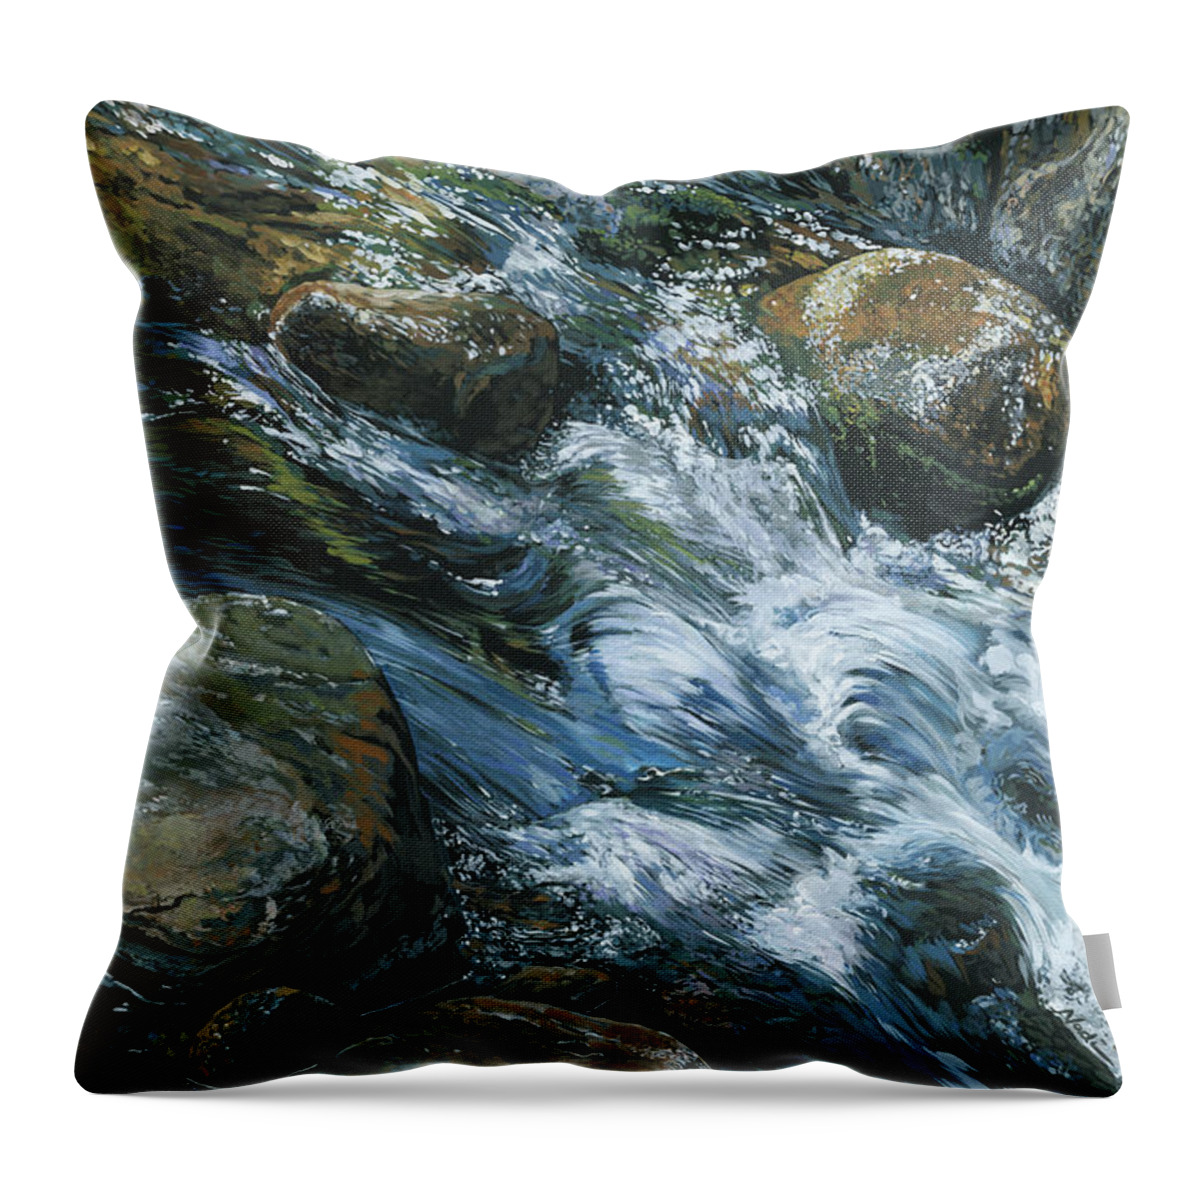 River Throw Pillow featuring the painting River Water by Nadi Spencer